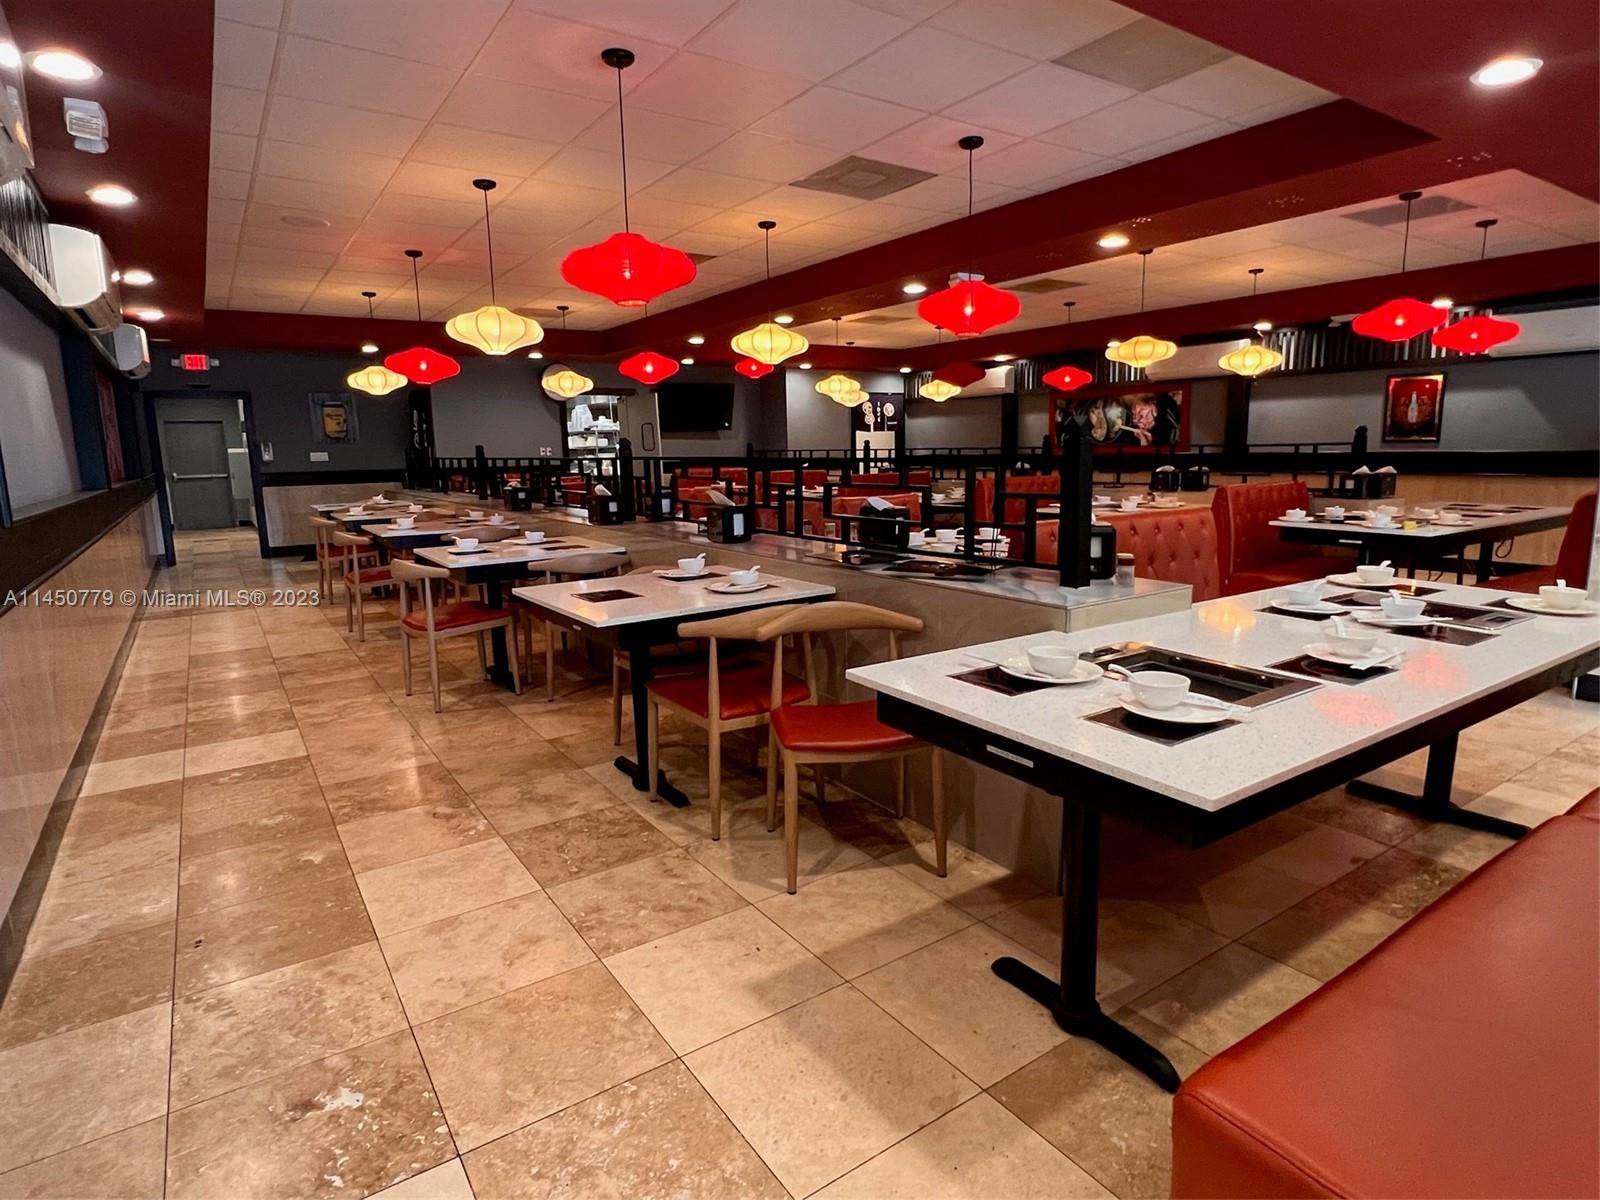 Excellent opportunity to purchase newly built turnkey Korean BBQ hotpot restaurant 3, 300sf in Fort Lauderdale for a fraction of buildout cost.